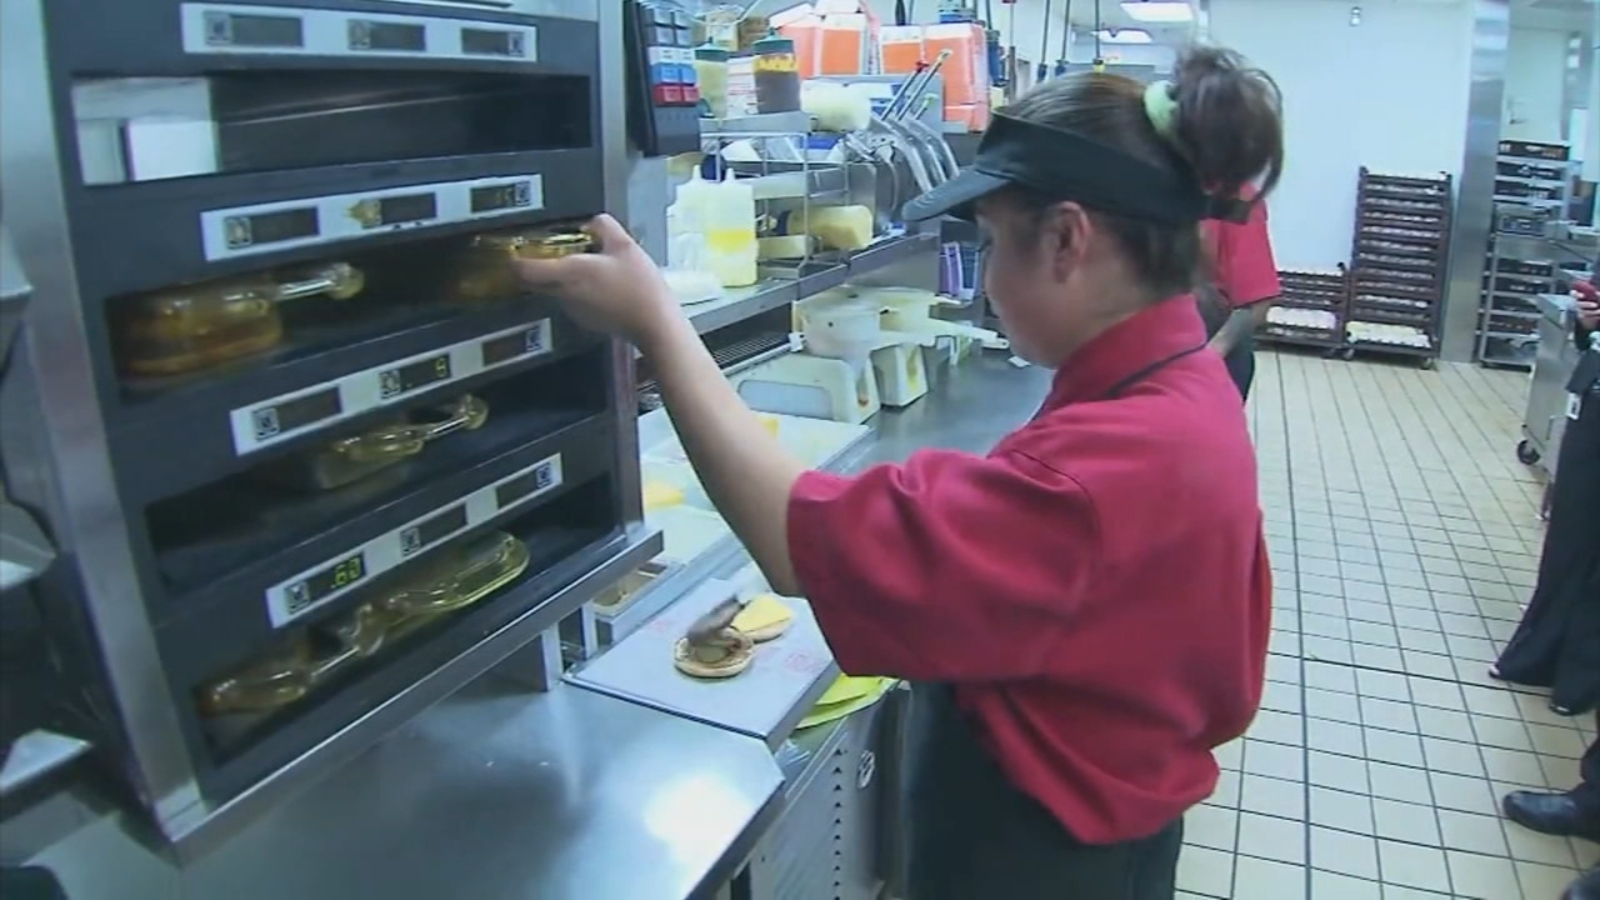 New 20 minimum wage for California's fastfood workers starts on April